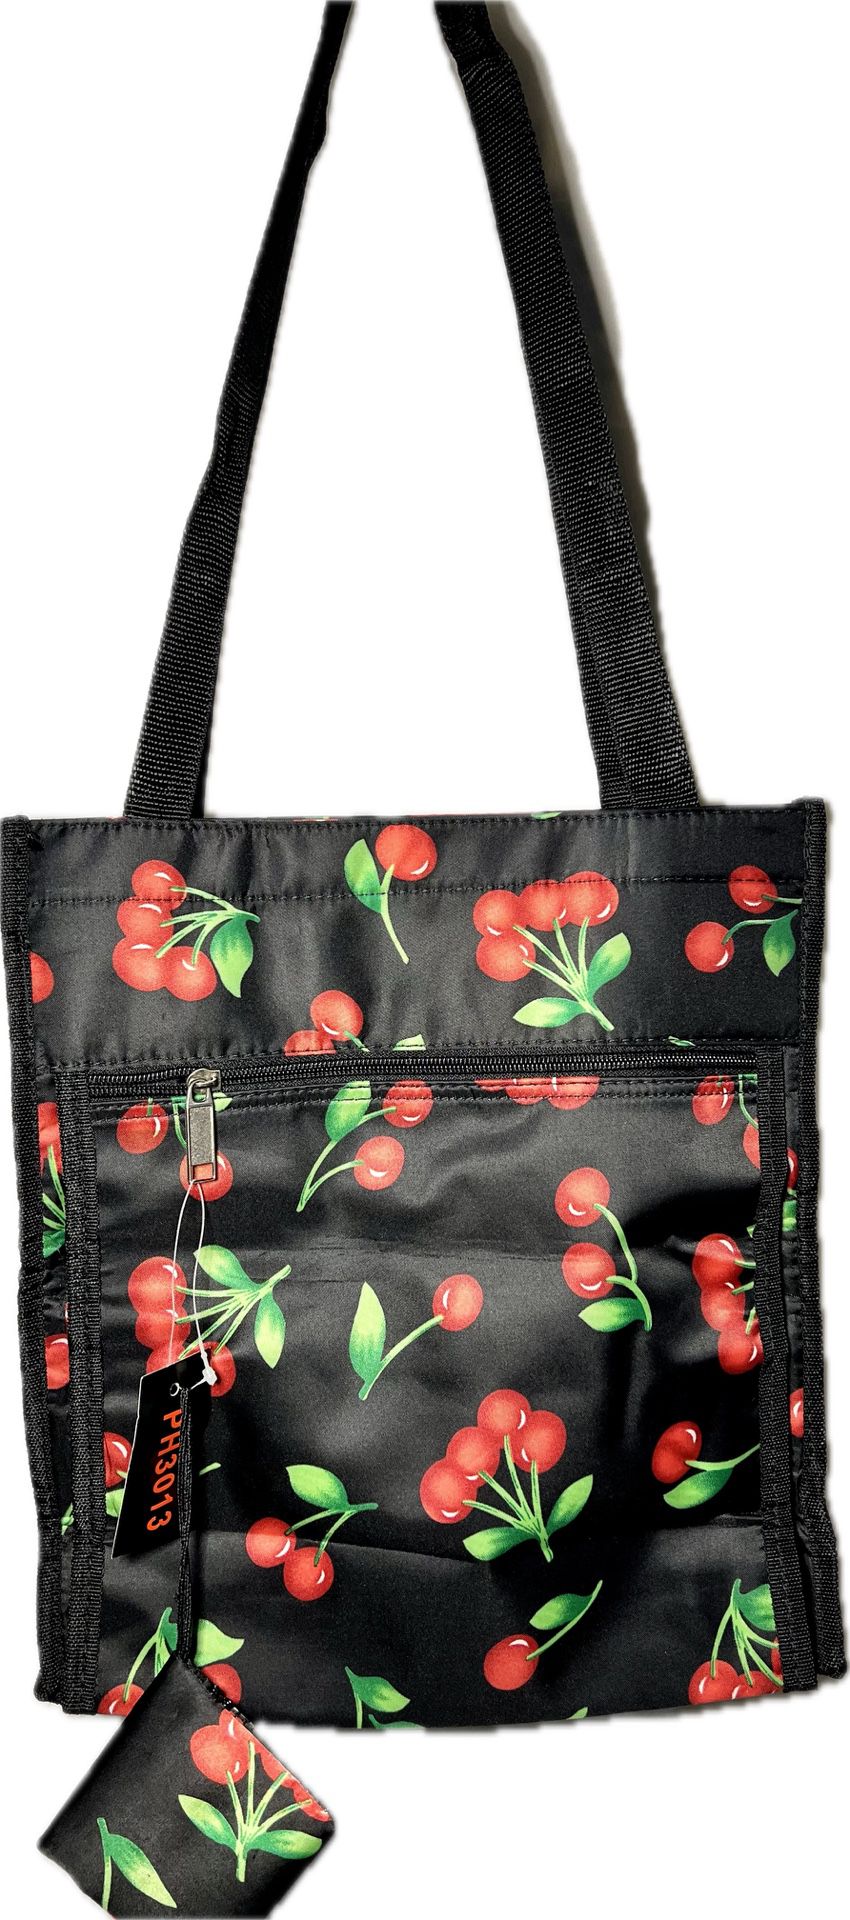 Wild Cherry Print Tote Bag With Coin Purse 13x12x4.5